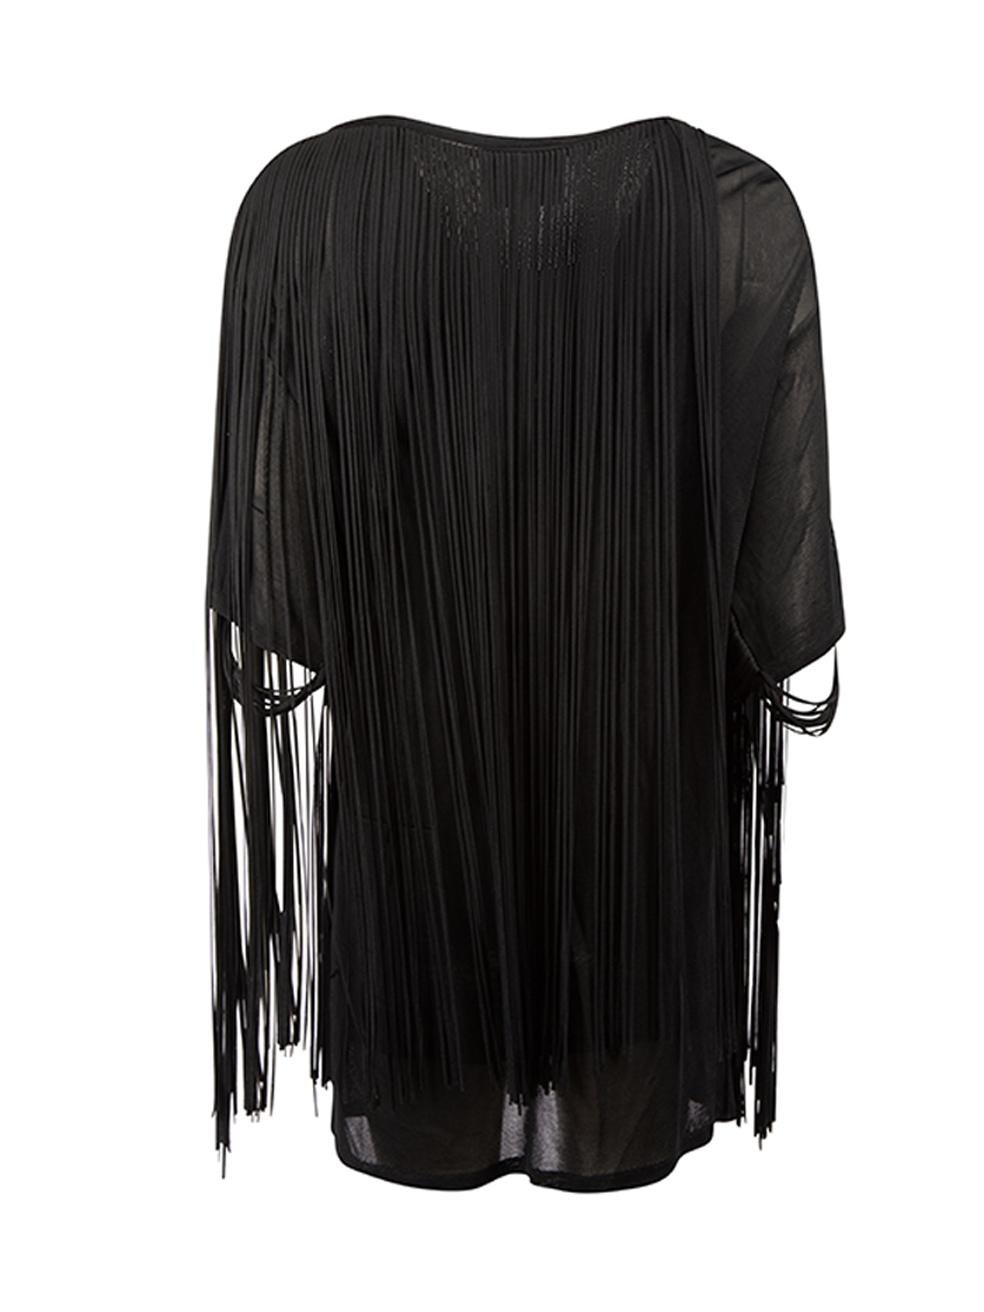 3.1 Phillip Lim Women's Black Fringed Short Sleeves Dress In Good Condition For Sale In London, GB